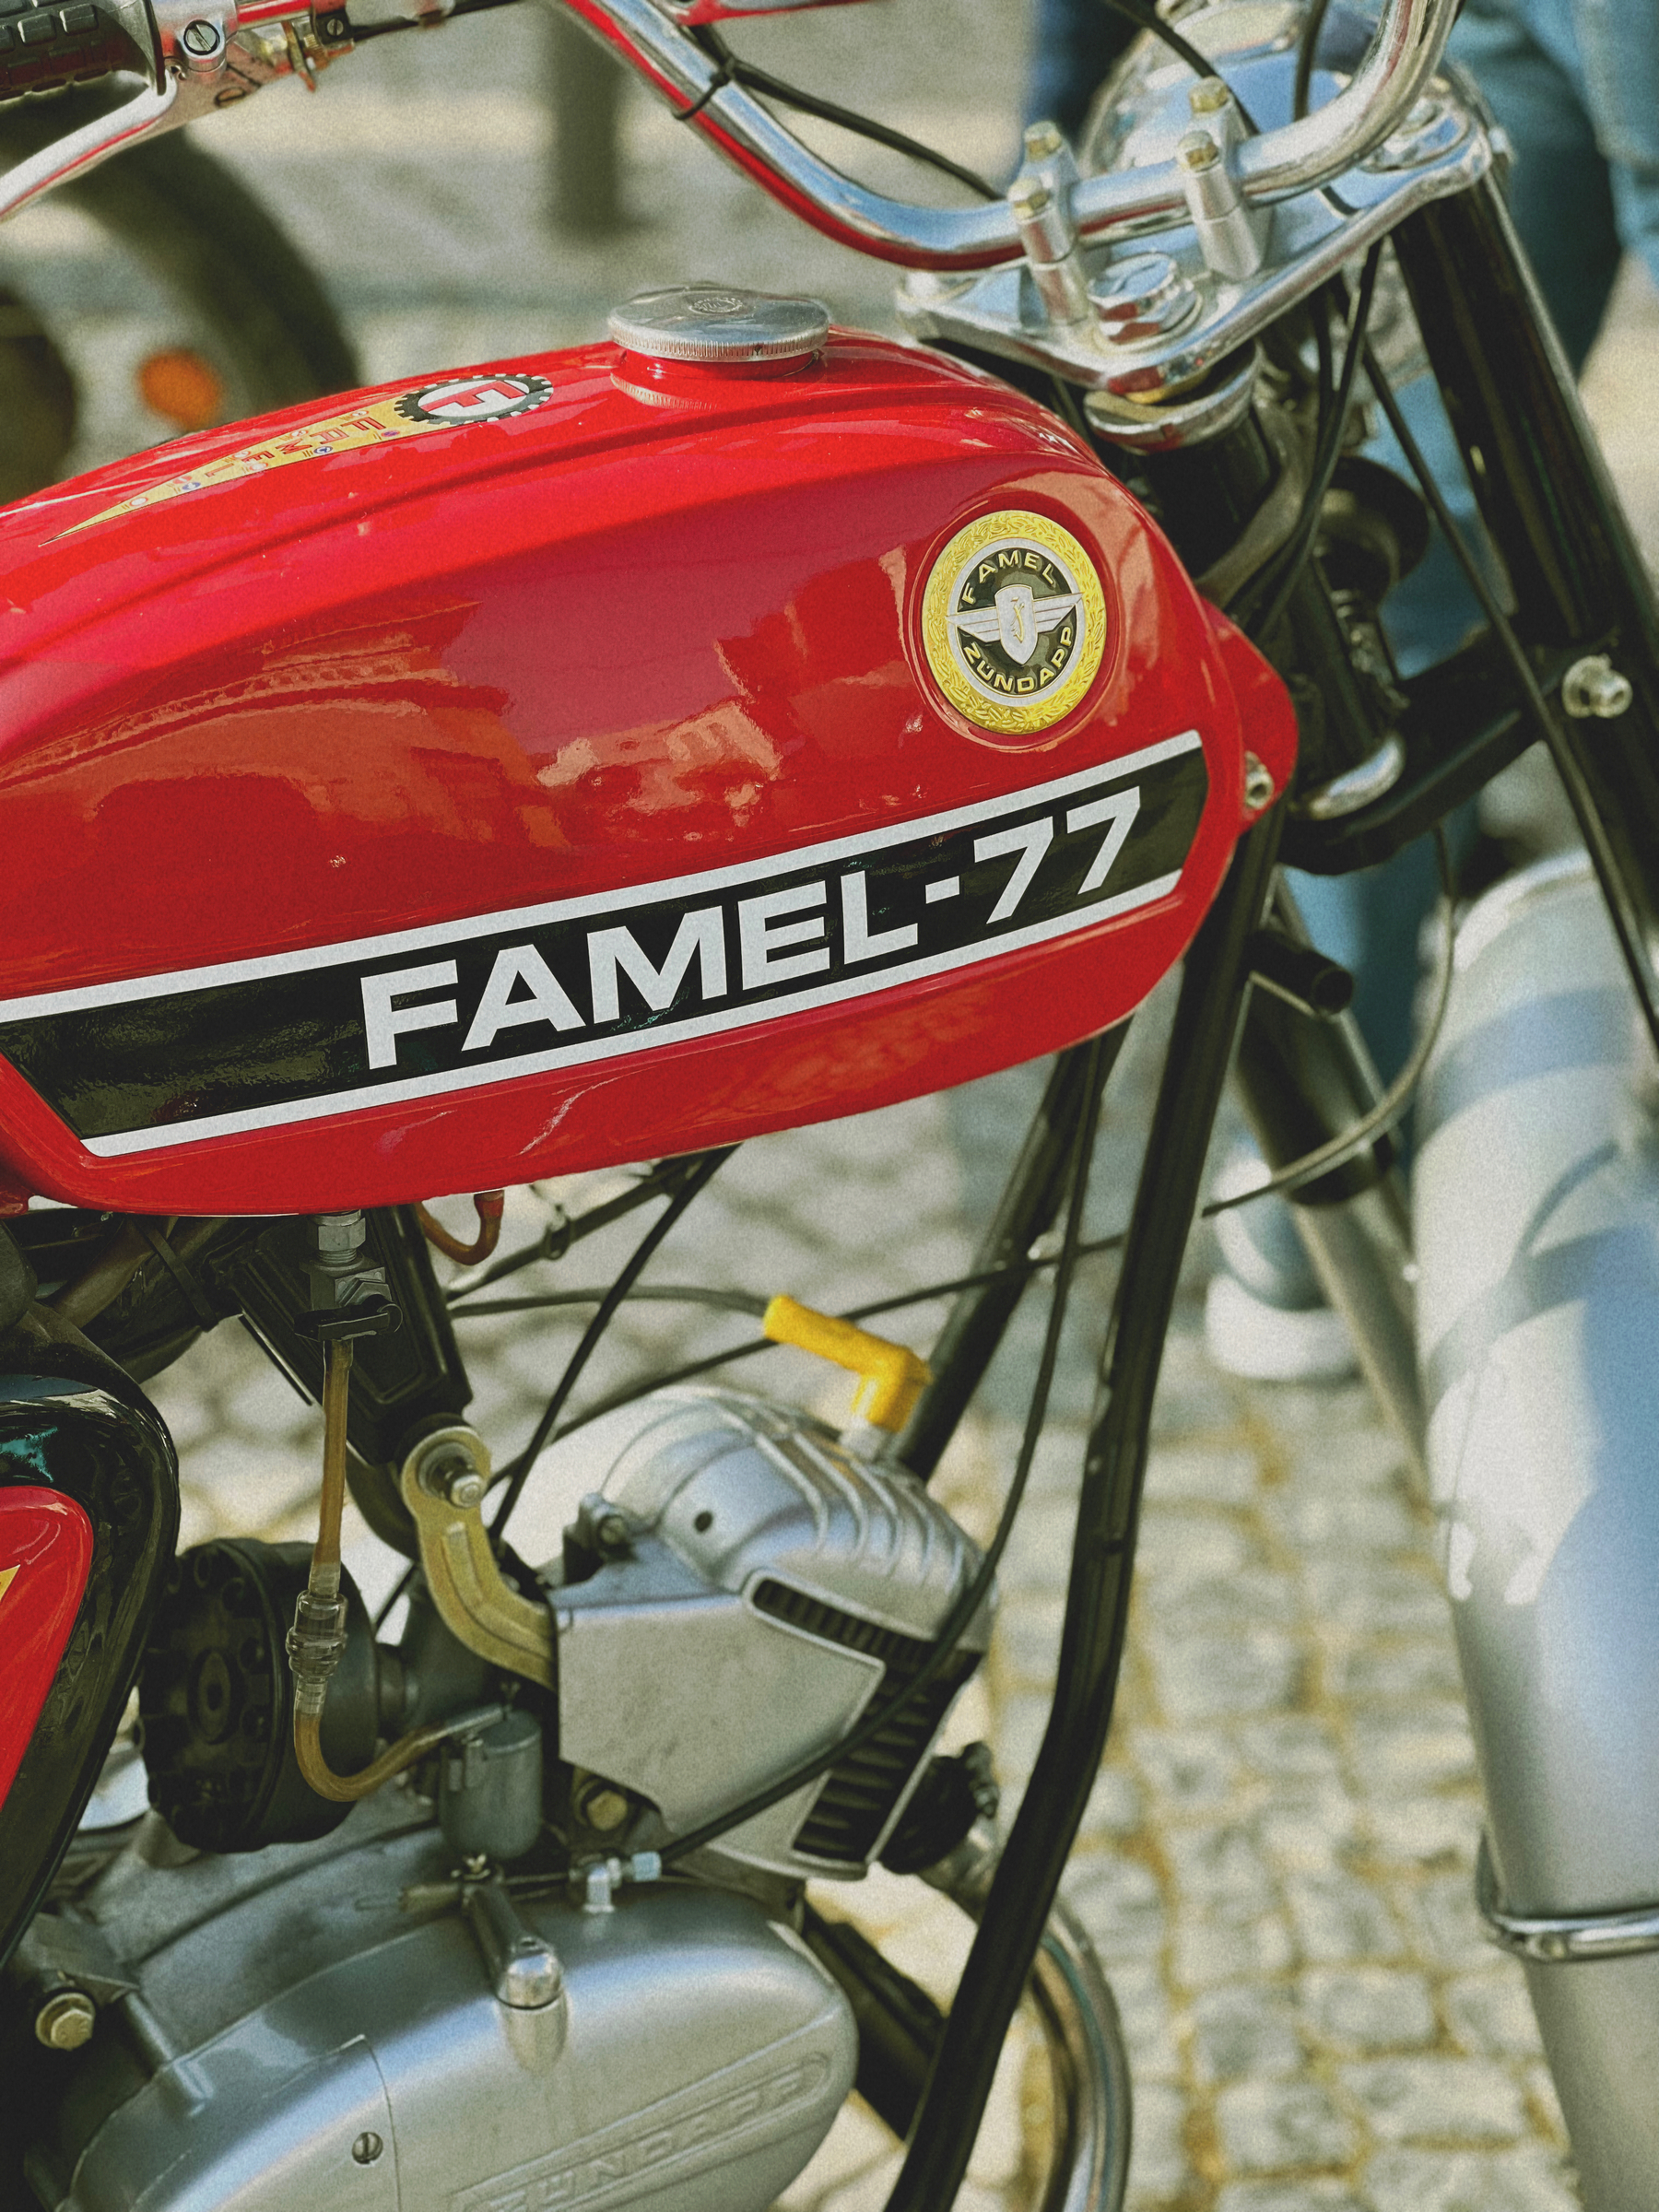 A classic FAMEL motorcycle. Red. 